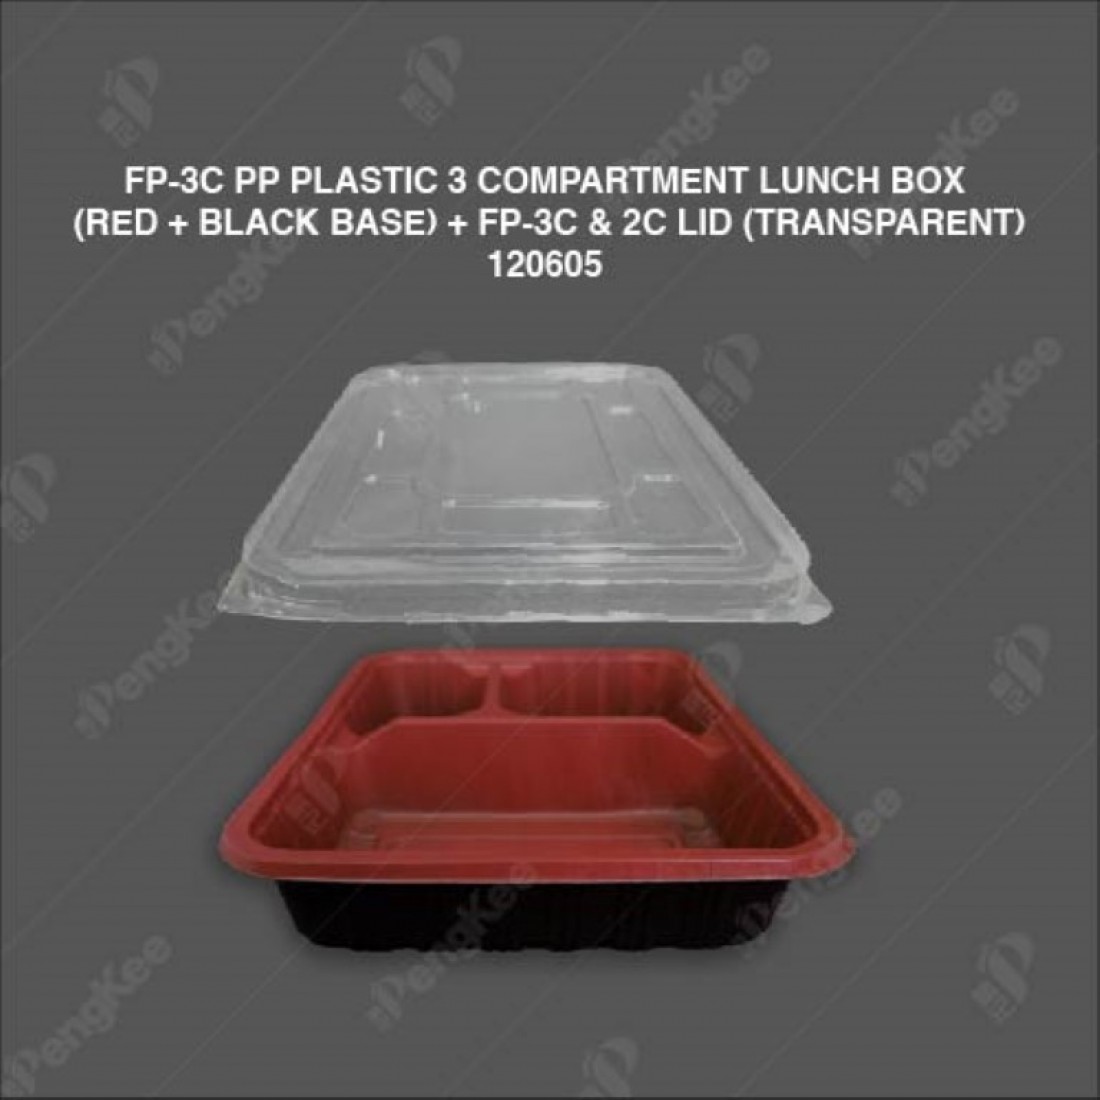 FP-3C PP PLASTIC 3 COMPARTMENT LUNCH BOX (RED+BLACK BASE) (TRANSPARENT COVER